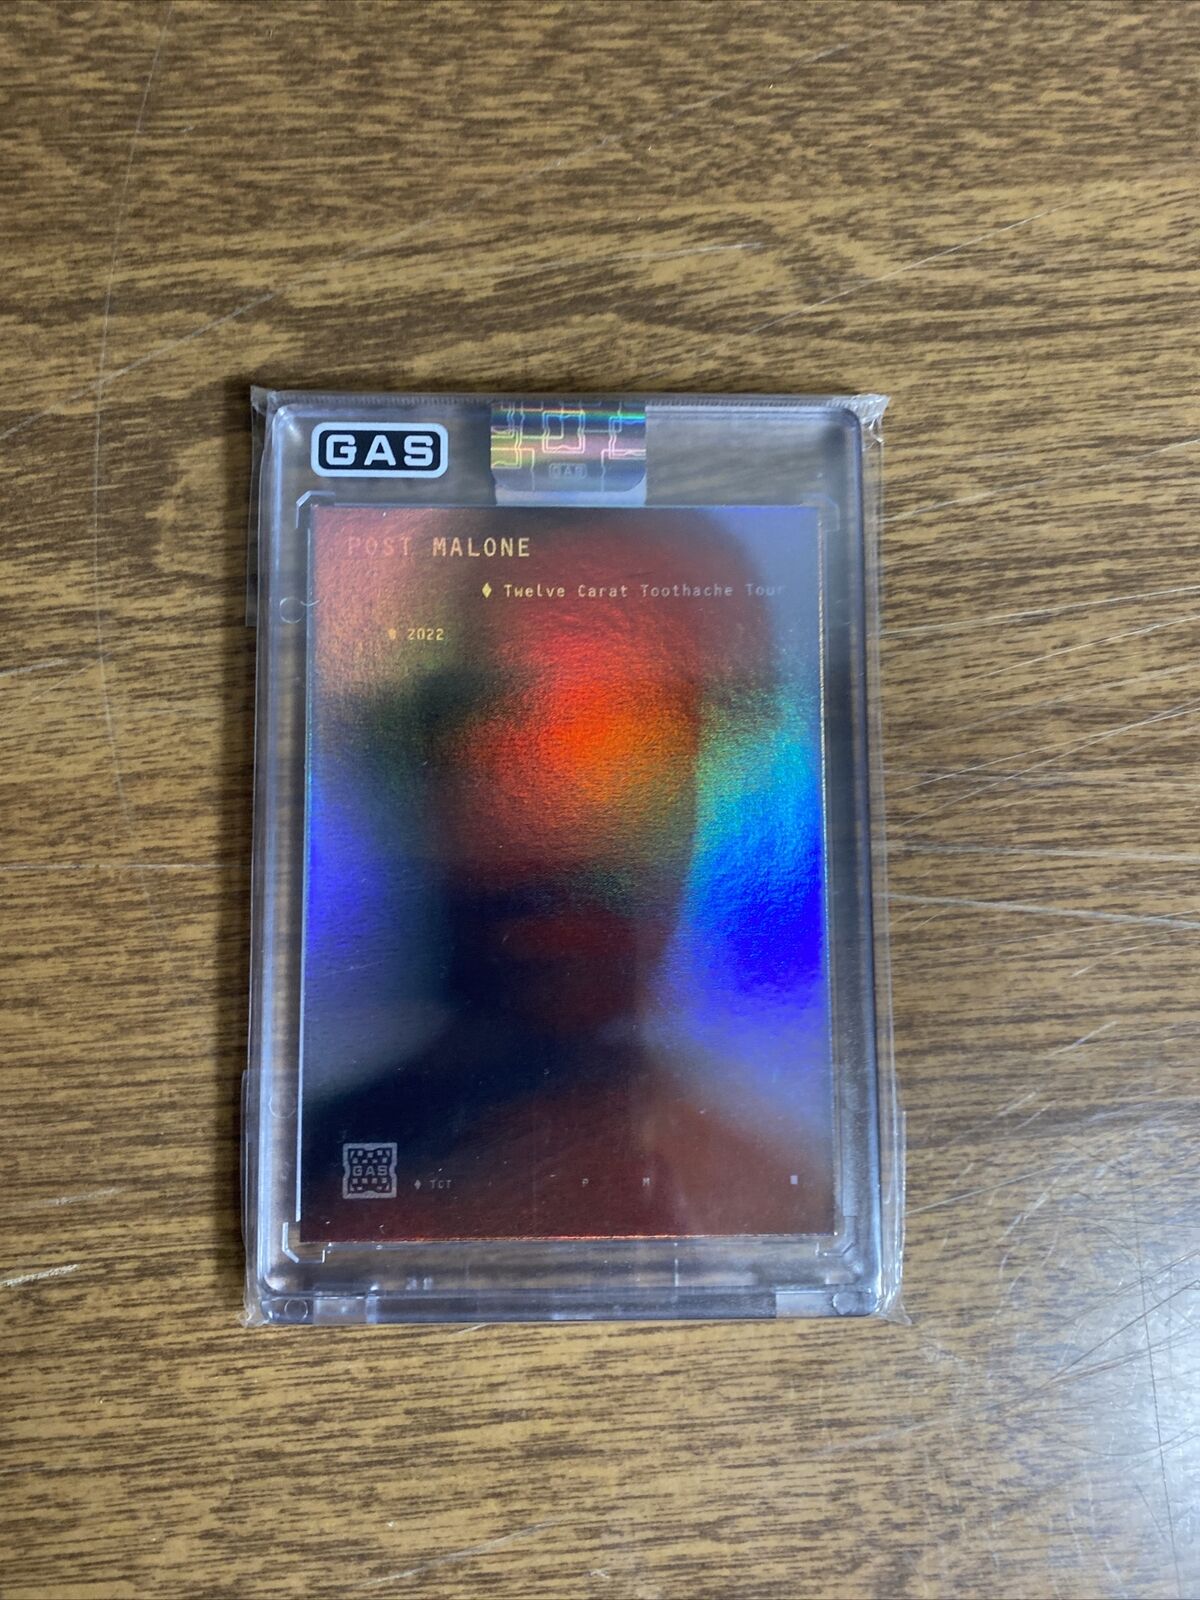 Official Post Malone Prism G.A.S. Trading Card 12 Twelve Carat Toothache Tour